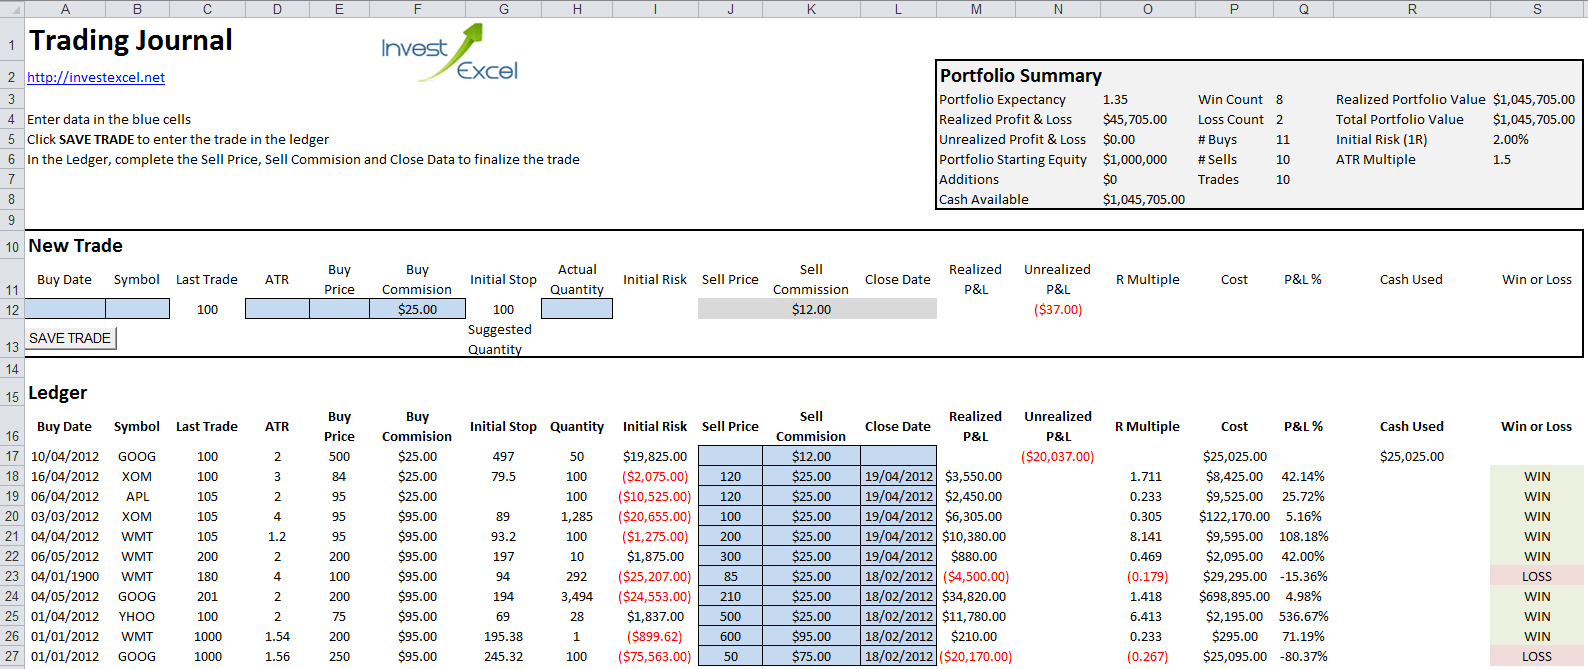 Stock trading journal software